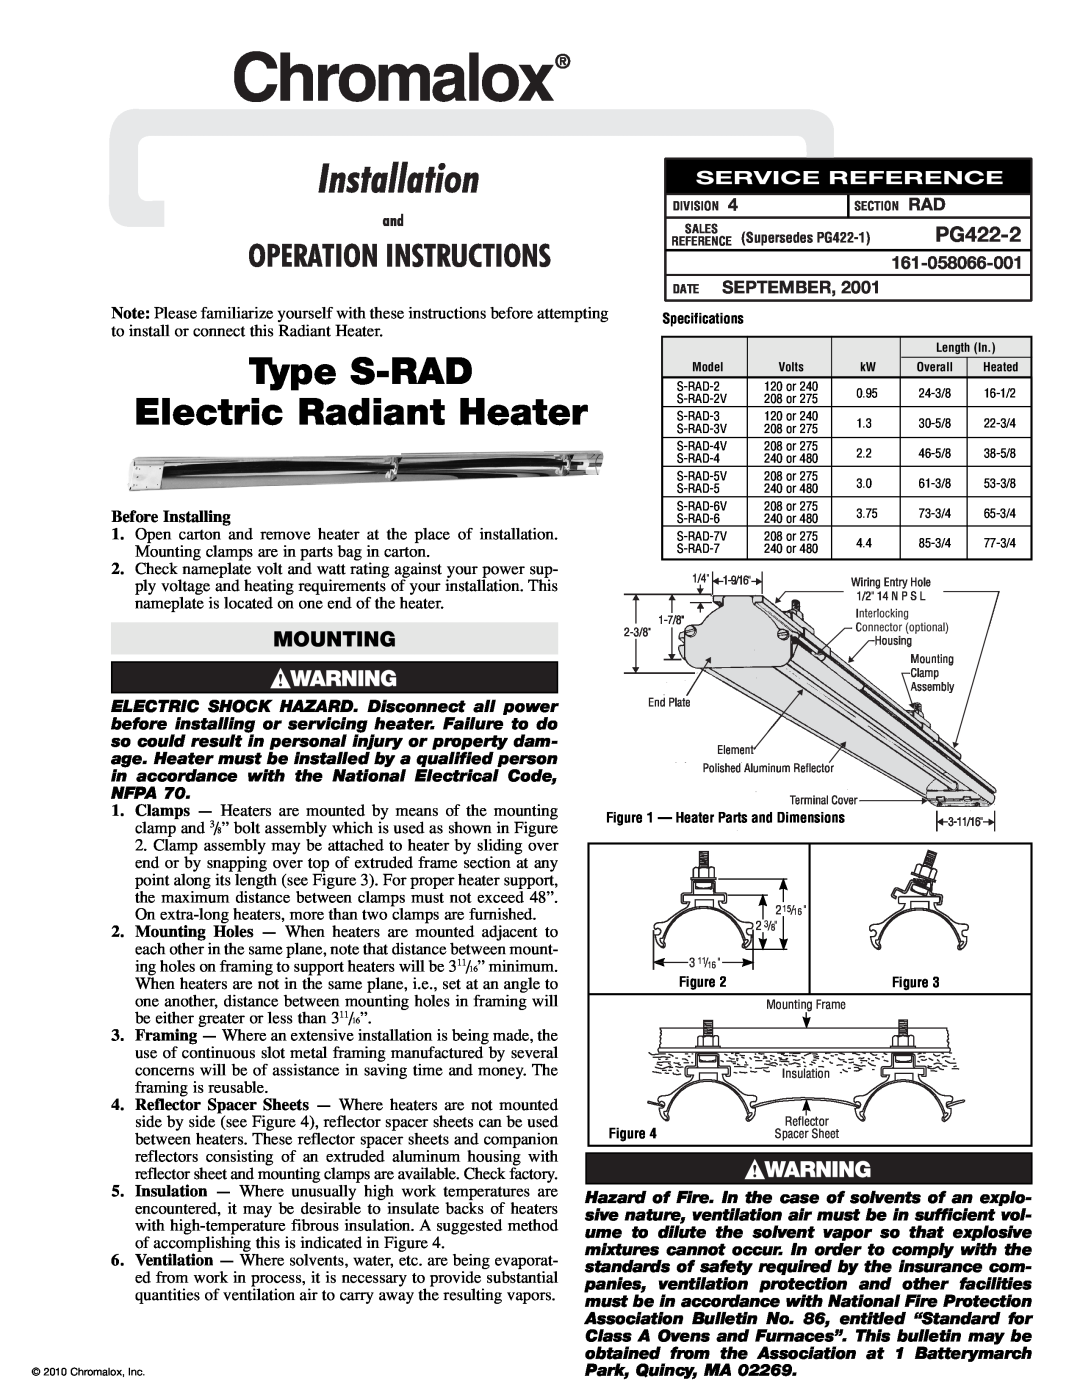 Chromalox S-RAD-2 specifications PG422-2, Mounting, 161-058066-001, Date September, Before Installing, Chromalox 